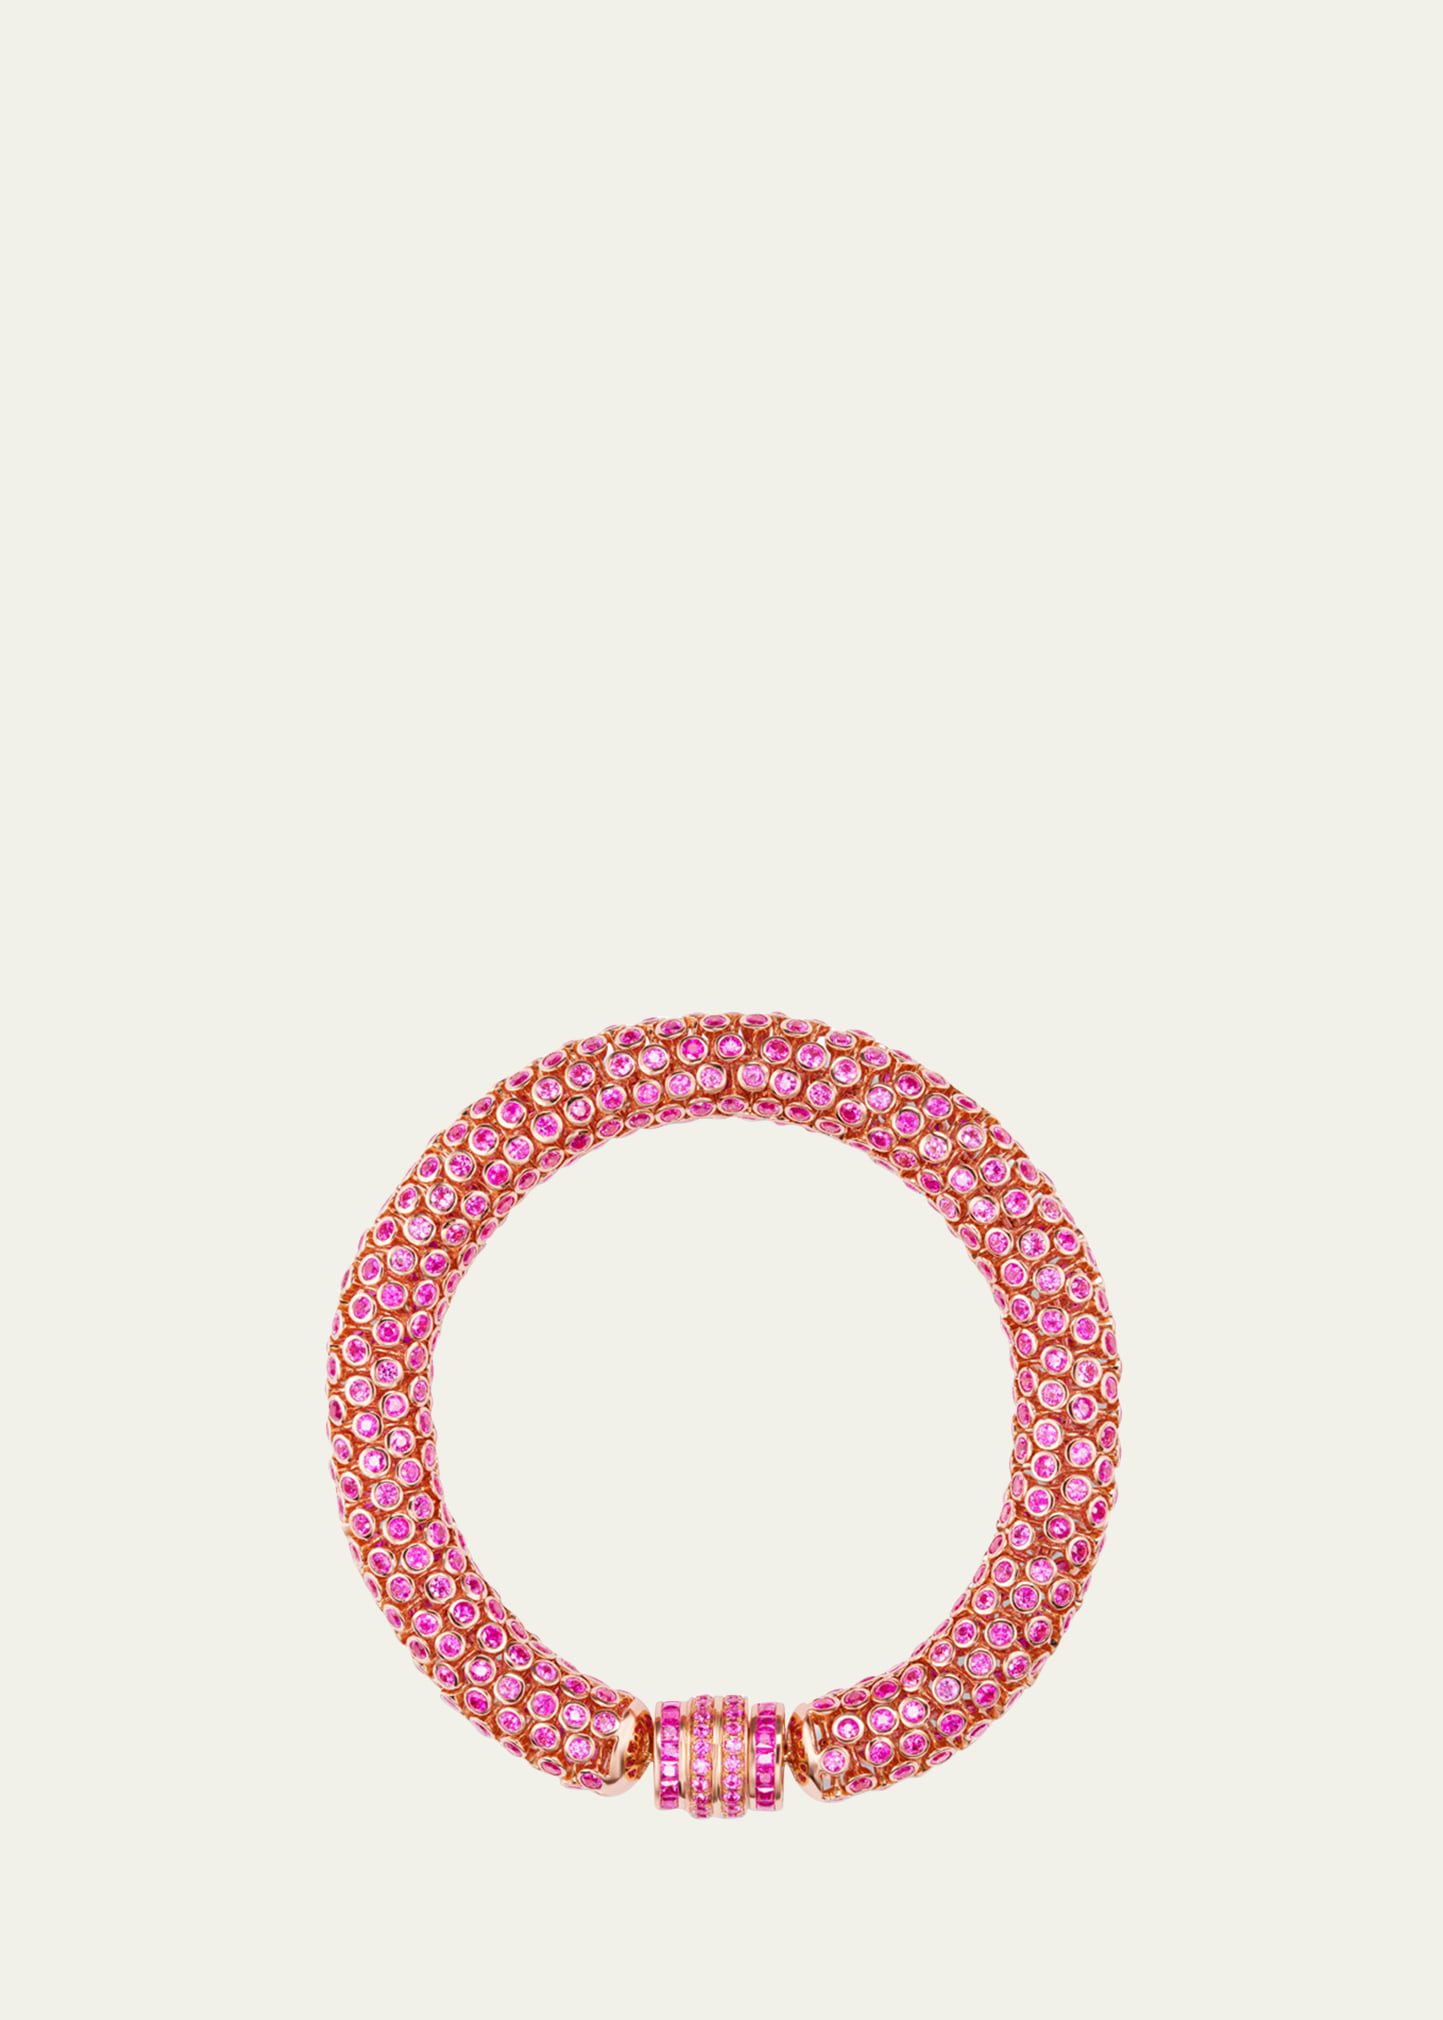 Dancing Queen Bracelet in Rose Gold with Pink Sapphire